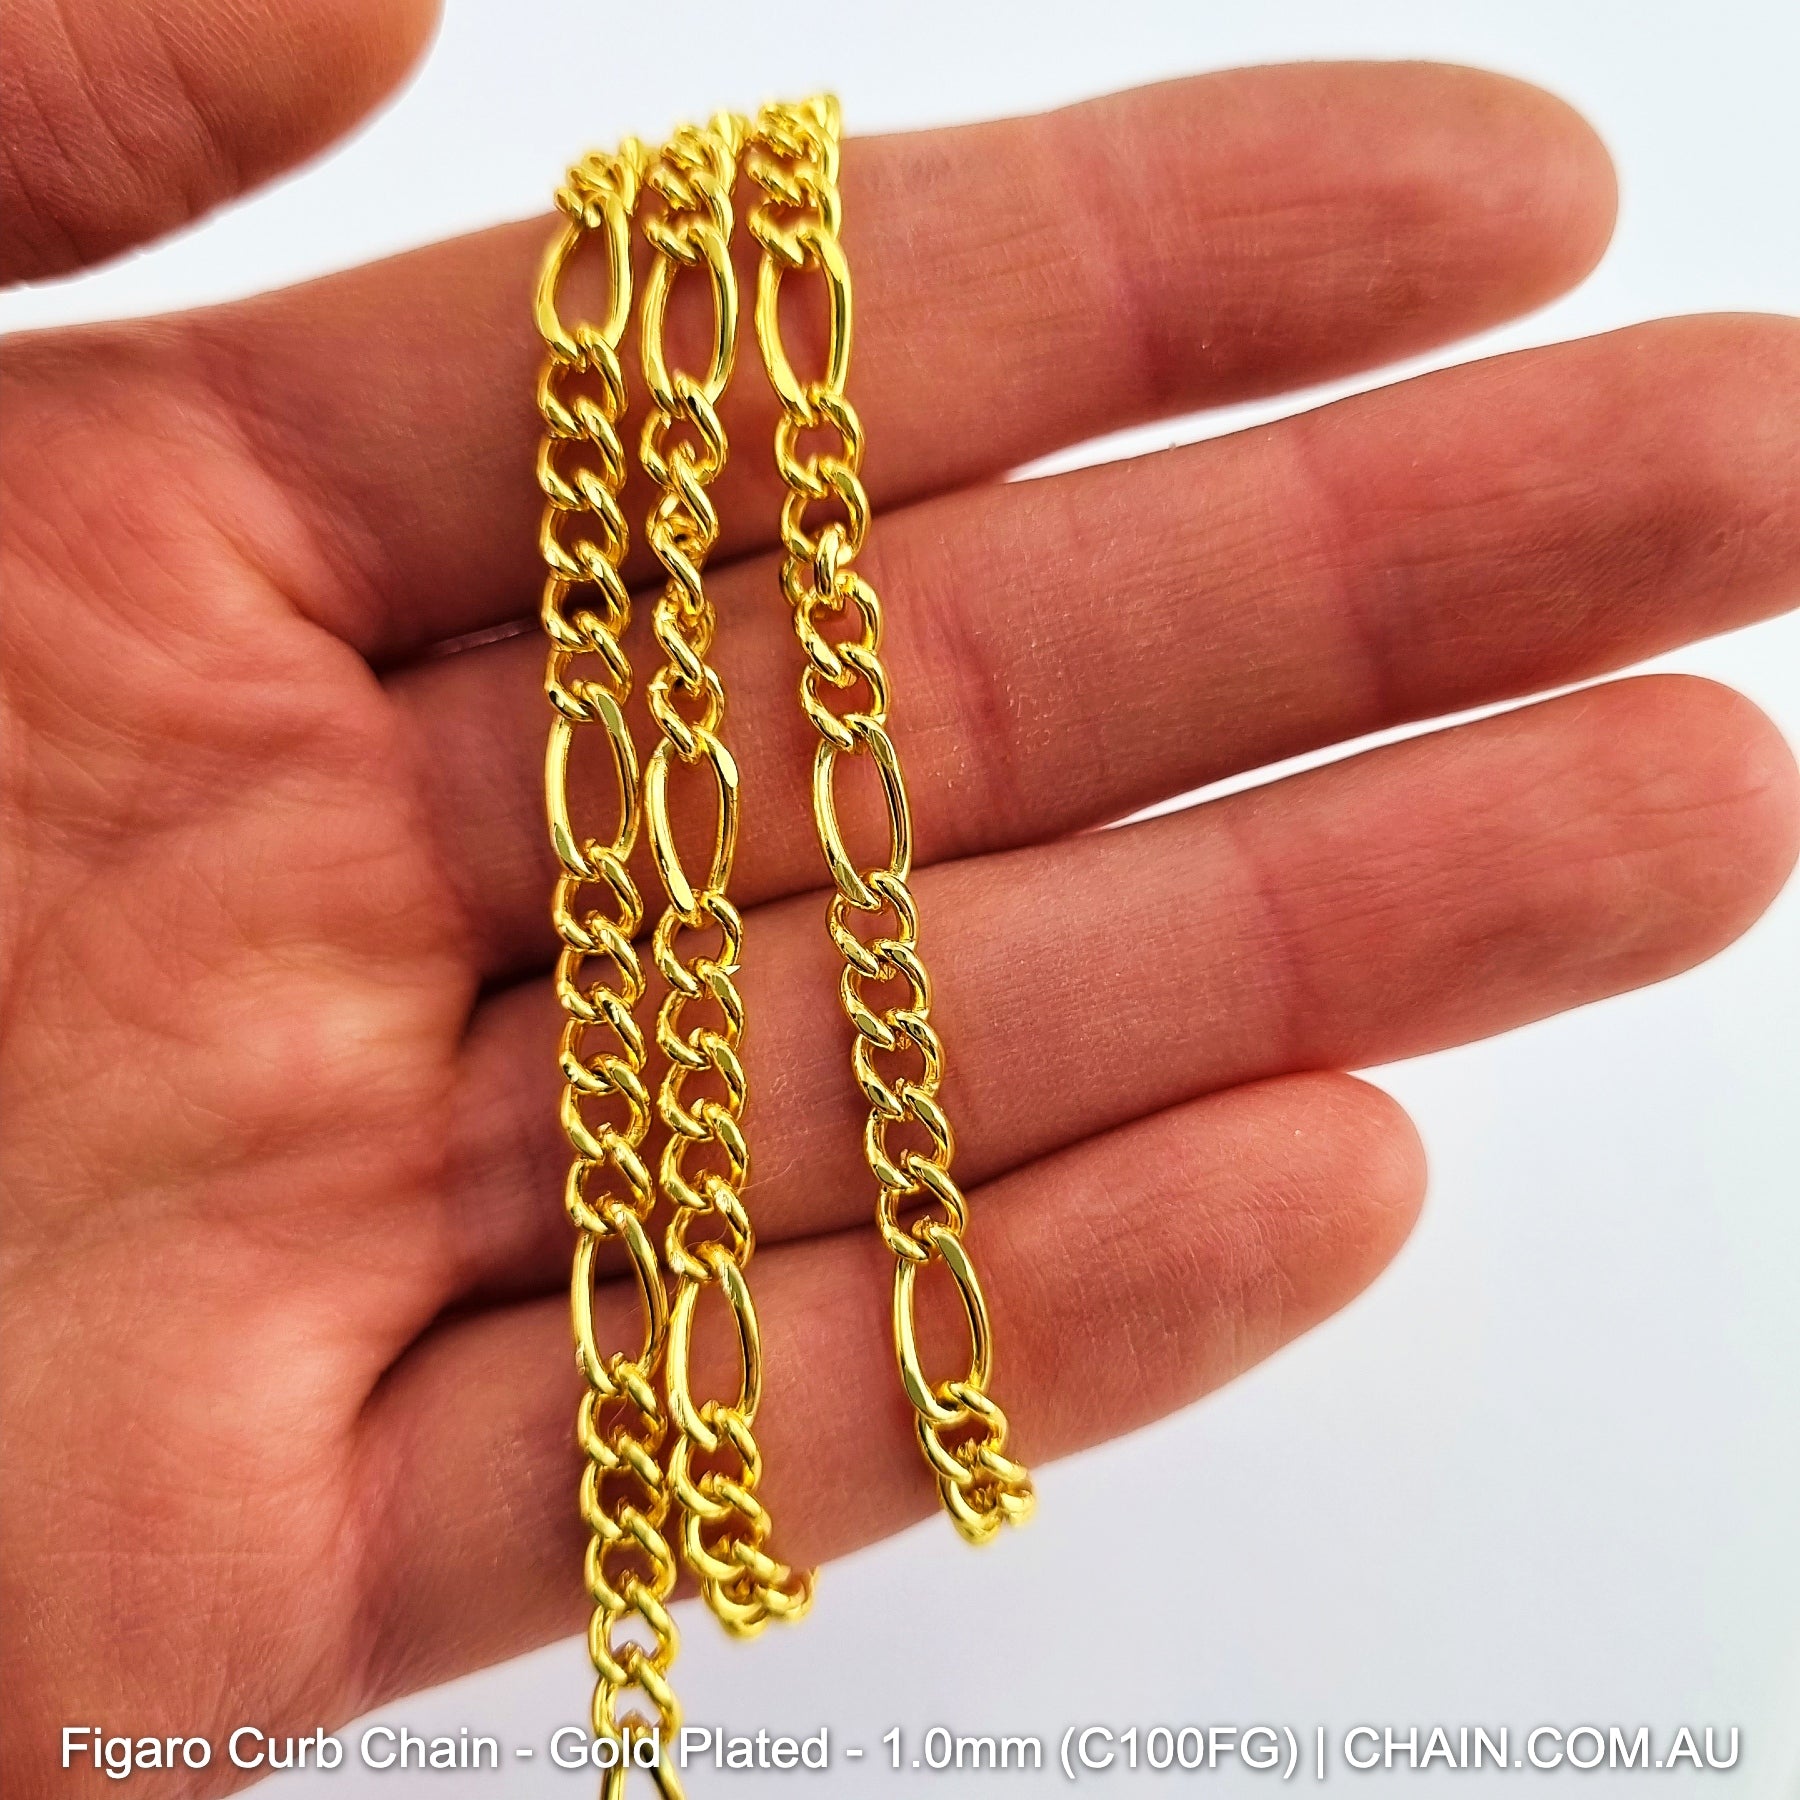 Figaro Curb Chain Gold Plated. Size: 1.0mm, C100FG. 25m Reel. Shop Jewellery Chain online. Australia wide shipping. Chain.com.au